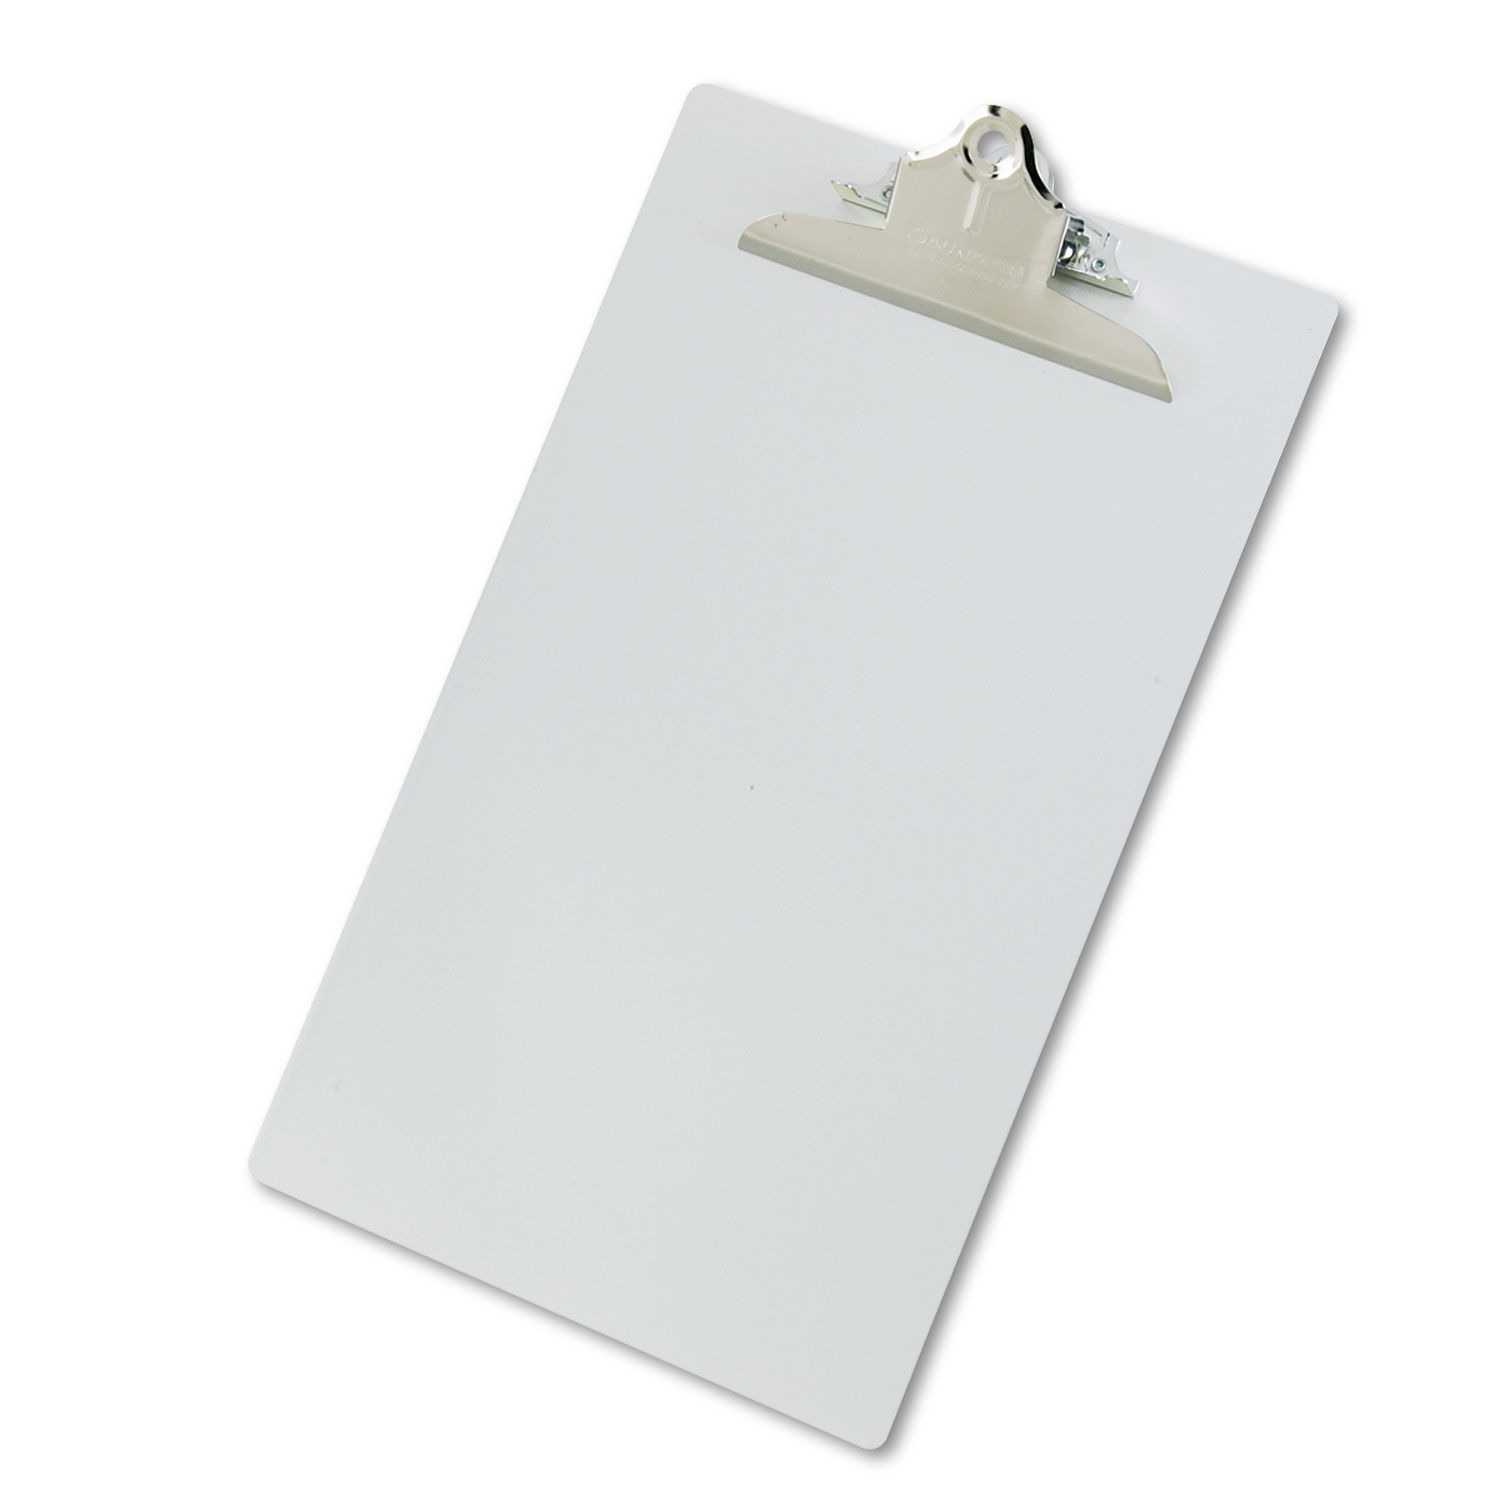 Recycled Aluminum Clipboard with High-Capacity Clip by Saunders SAU22519